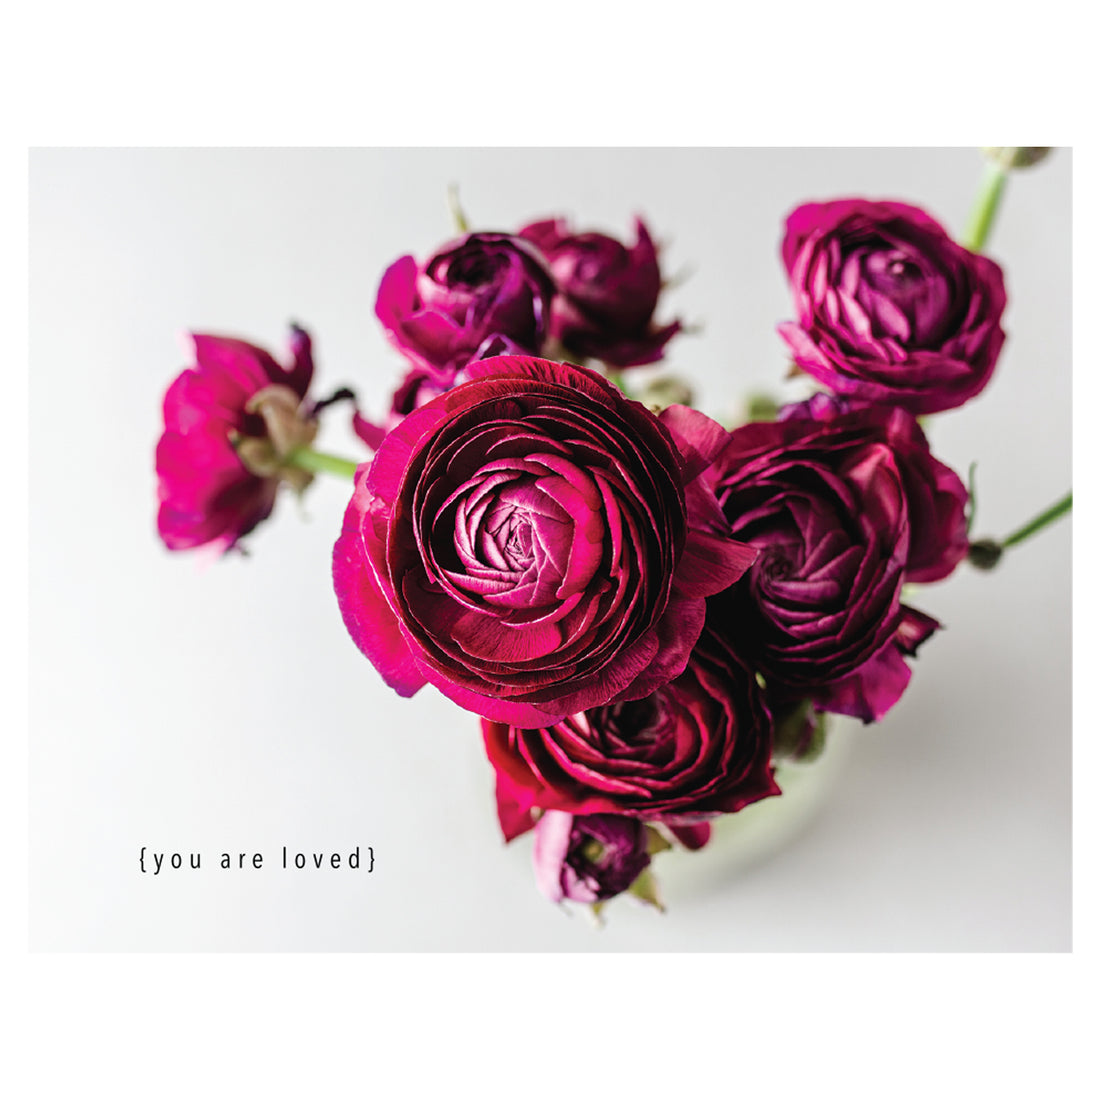 A photo of a vase of deep magenta flowers that resemble a heart on a white background, with &quot;{you are loved}&quot; printed in black in the lower left of the card.